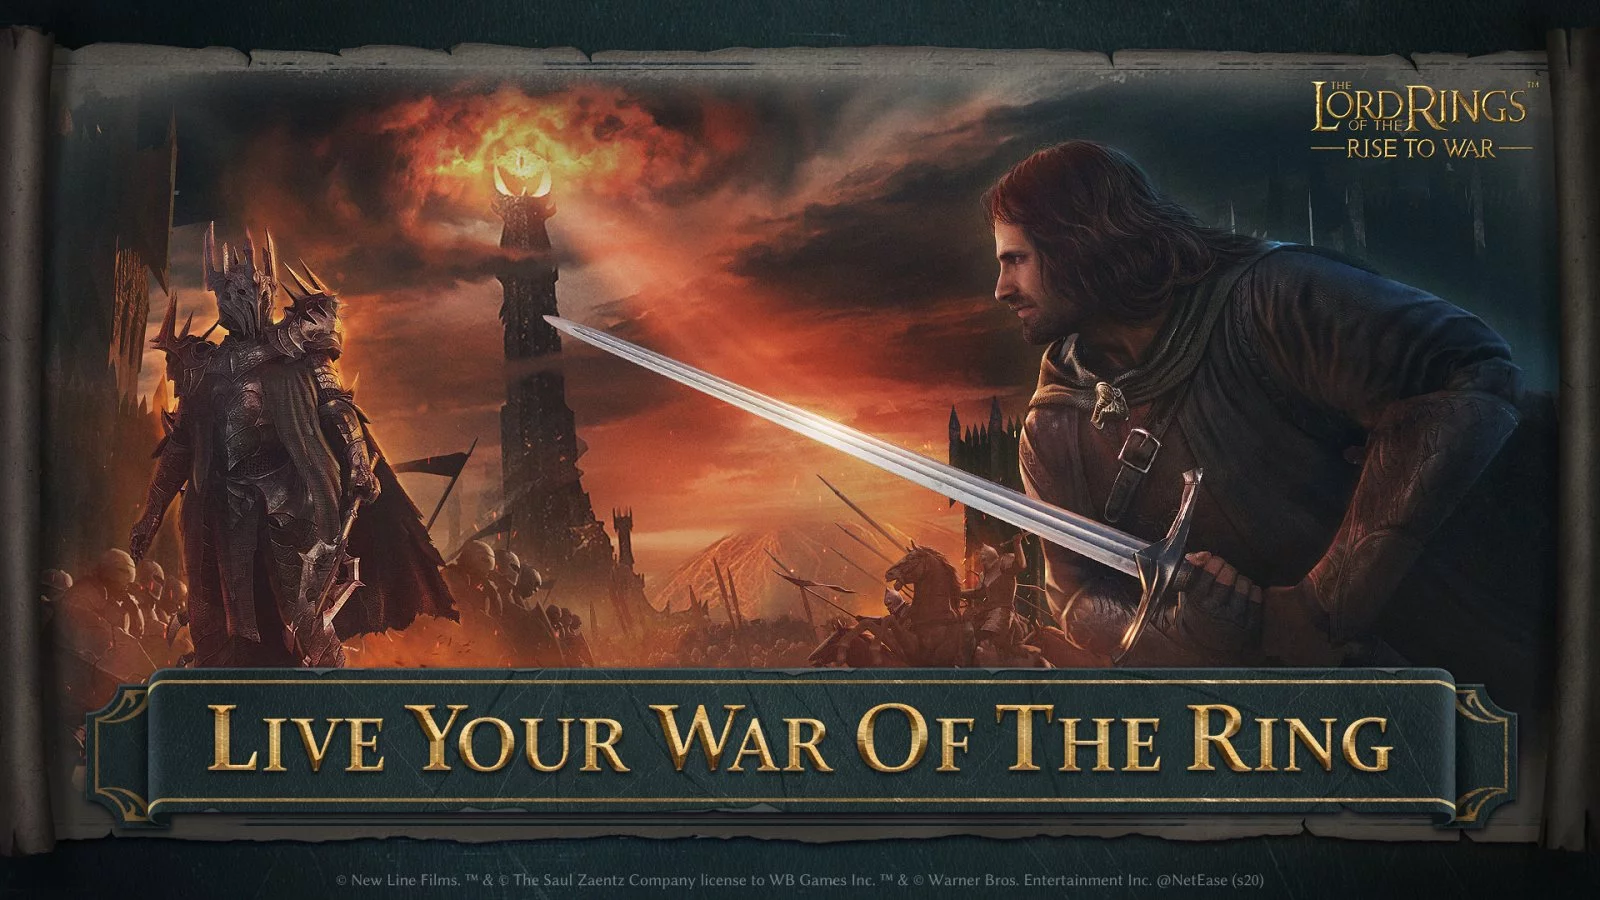 The-Lord-of-the-Rings-Rise-to-War The Lord of the Rings: Rise to War será lançado em 23 de setembro, faça o pré-registro para obter vantagens especiais